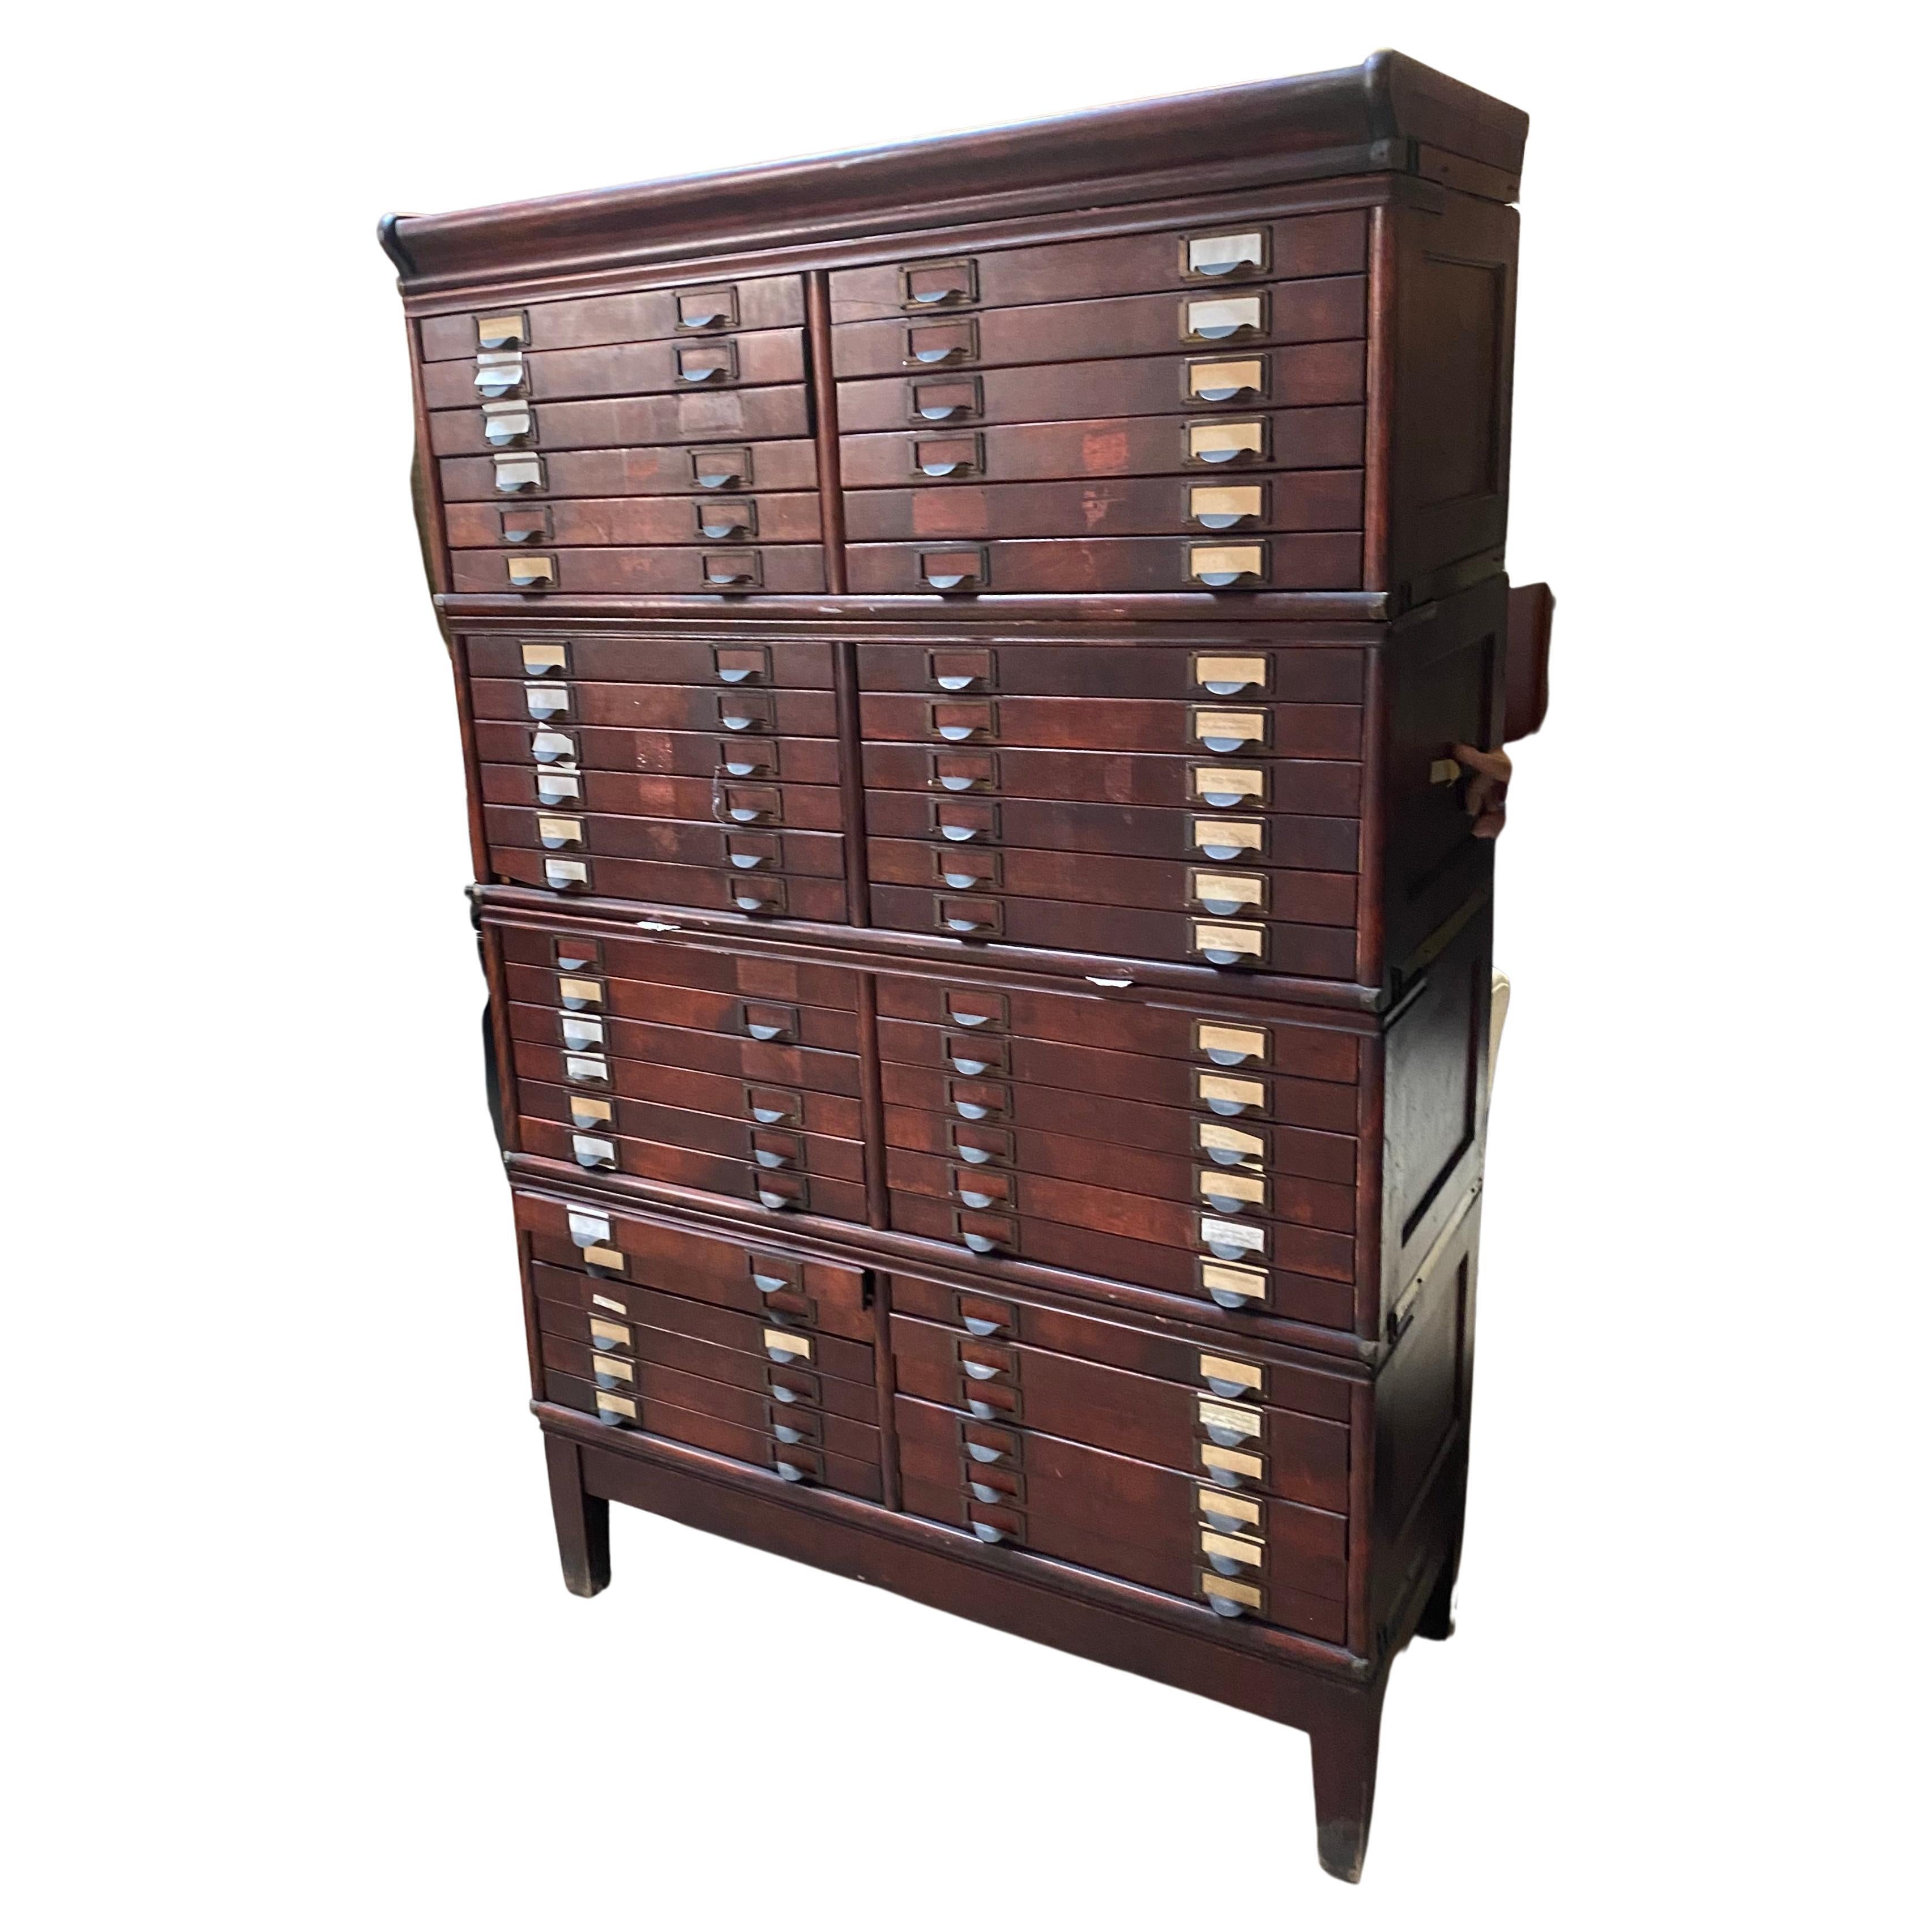 Wonderful Globe Wernicke multi-drawer flat file, cabinet / storage, 48 drawers. Cabinet in 4 sections, Amazing original condition, finish, patina, Perfect for art, jewelry, other collections. Hand delivery avail to New York City or anywhere en route